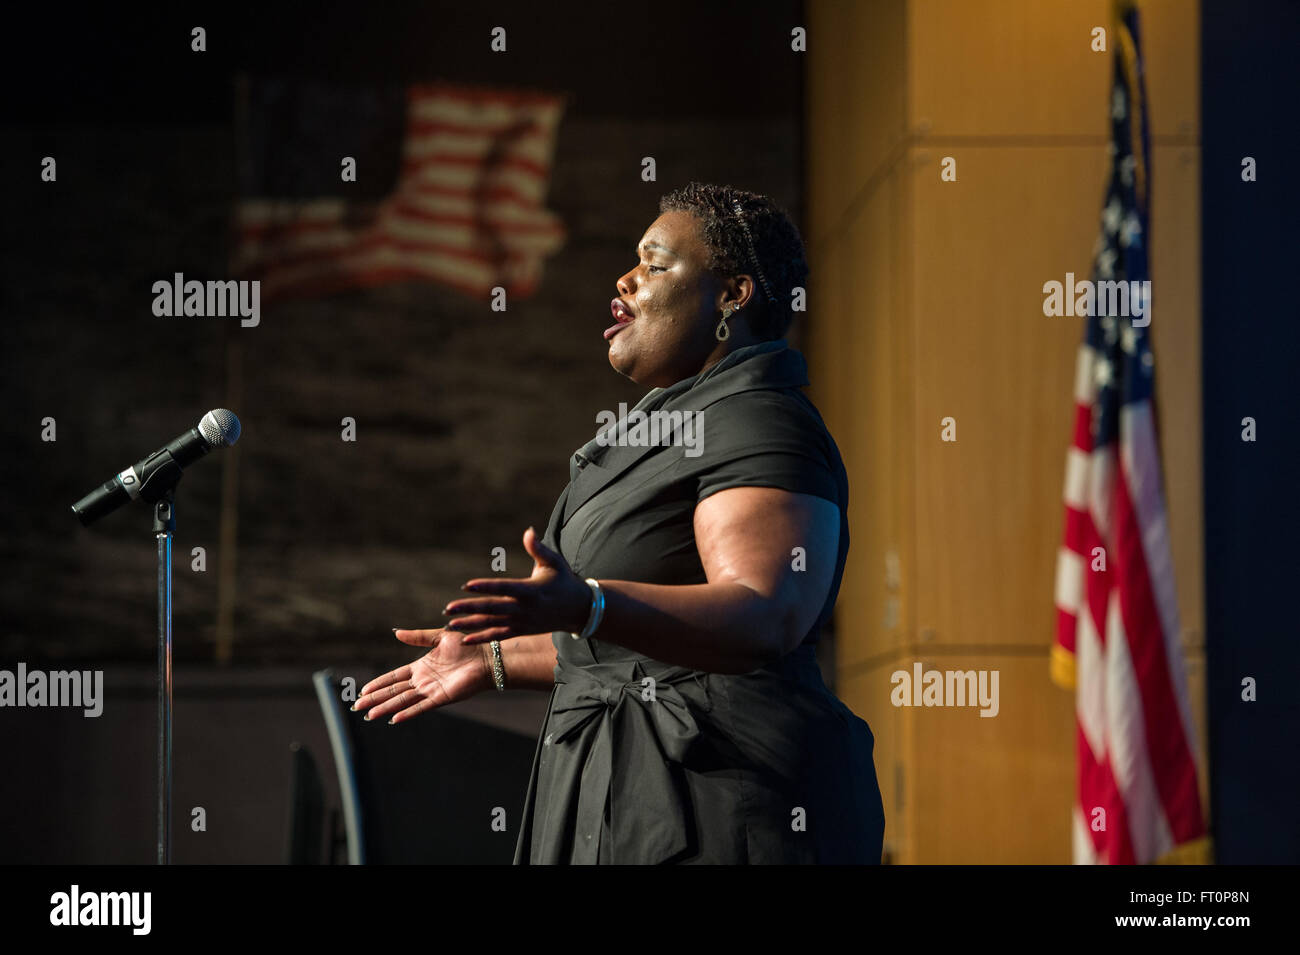 Renee Barnes, soloist, performs at NASA's Black History Month program on Wednesday, February 24, 2016 at NASA Headquarters in Washington, DC. During the program, Dr. George Carruthers and Dr. Katherine Johnson were honored for their contributions to NASA. Stock Photo